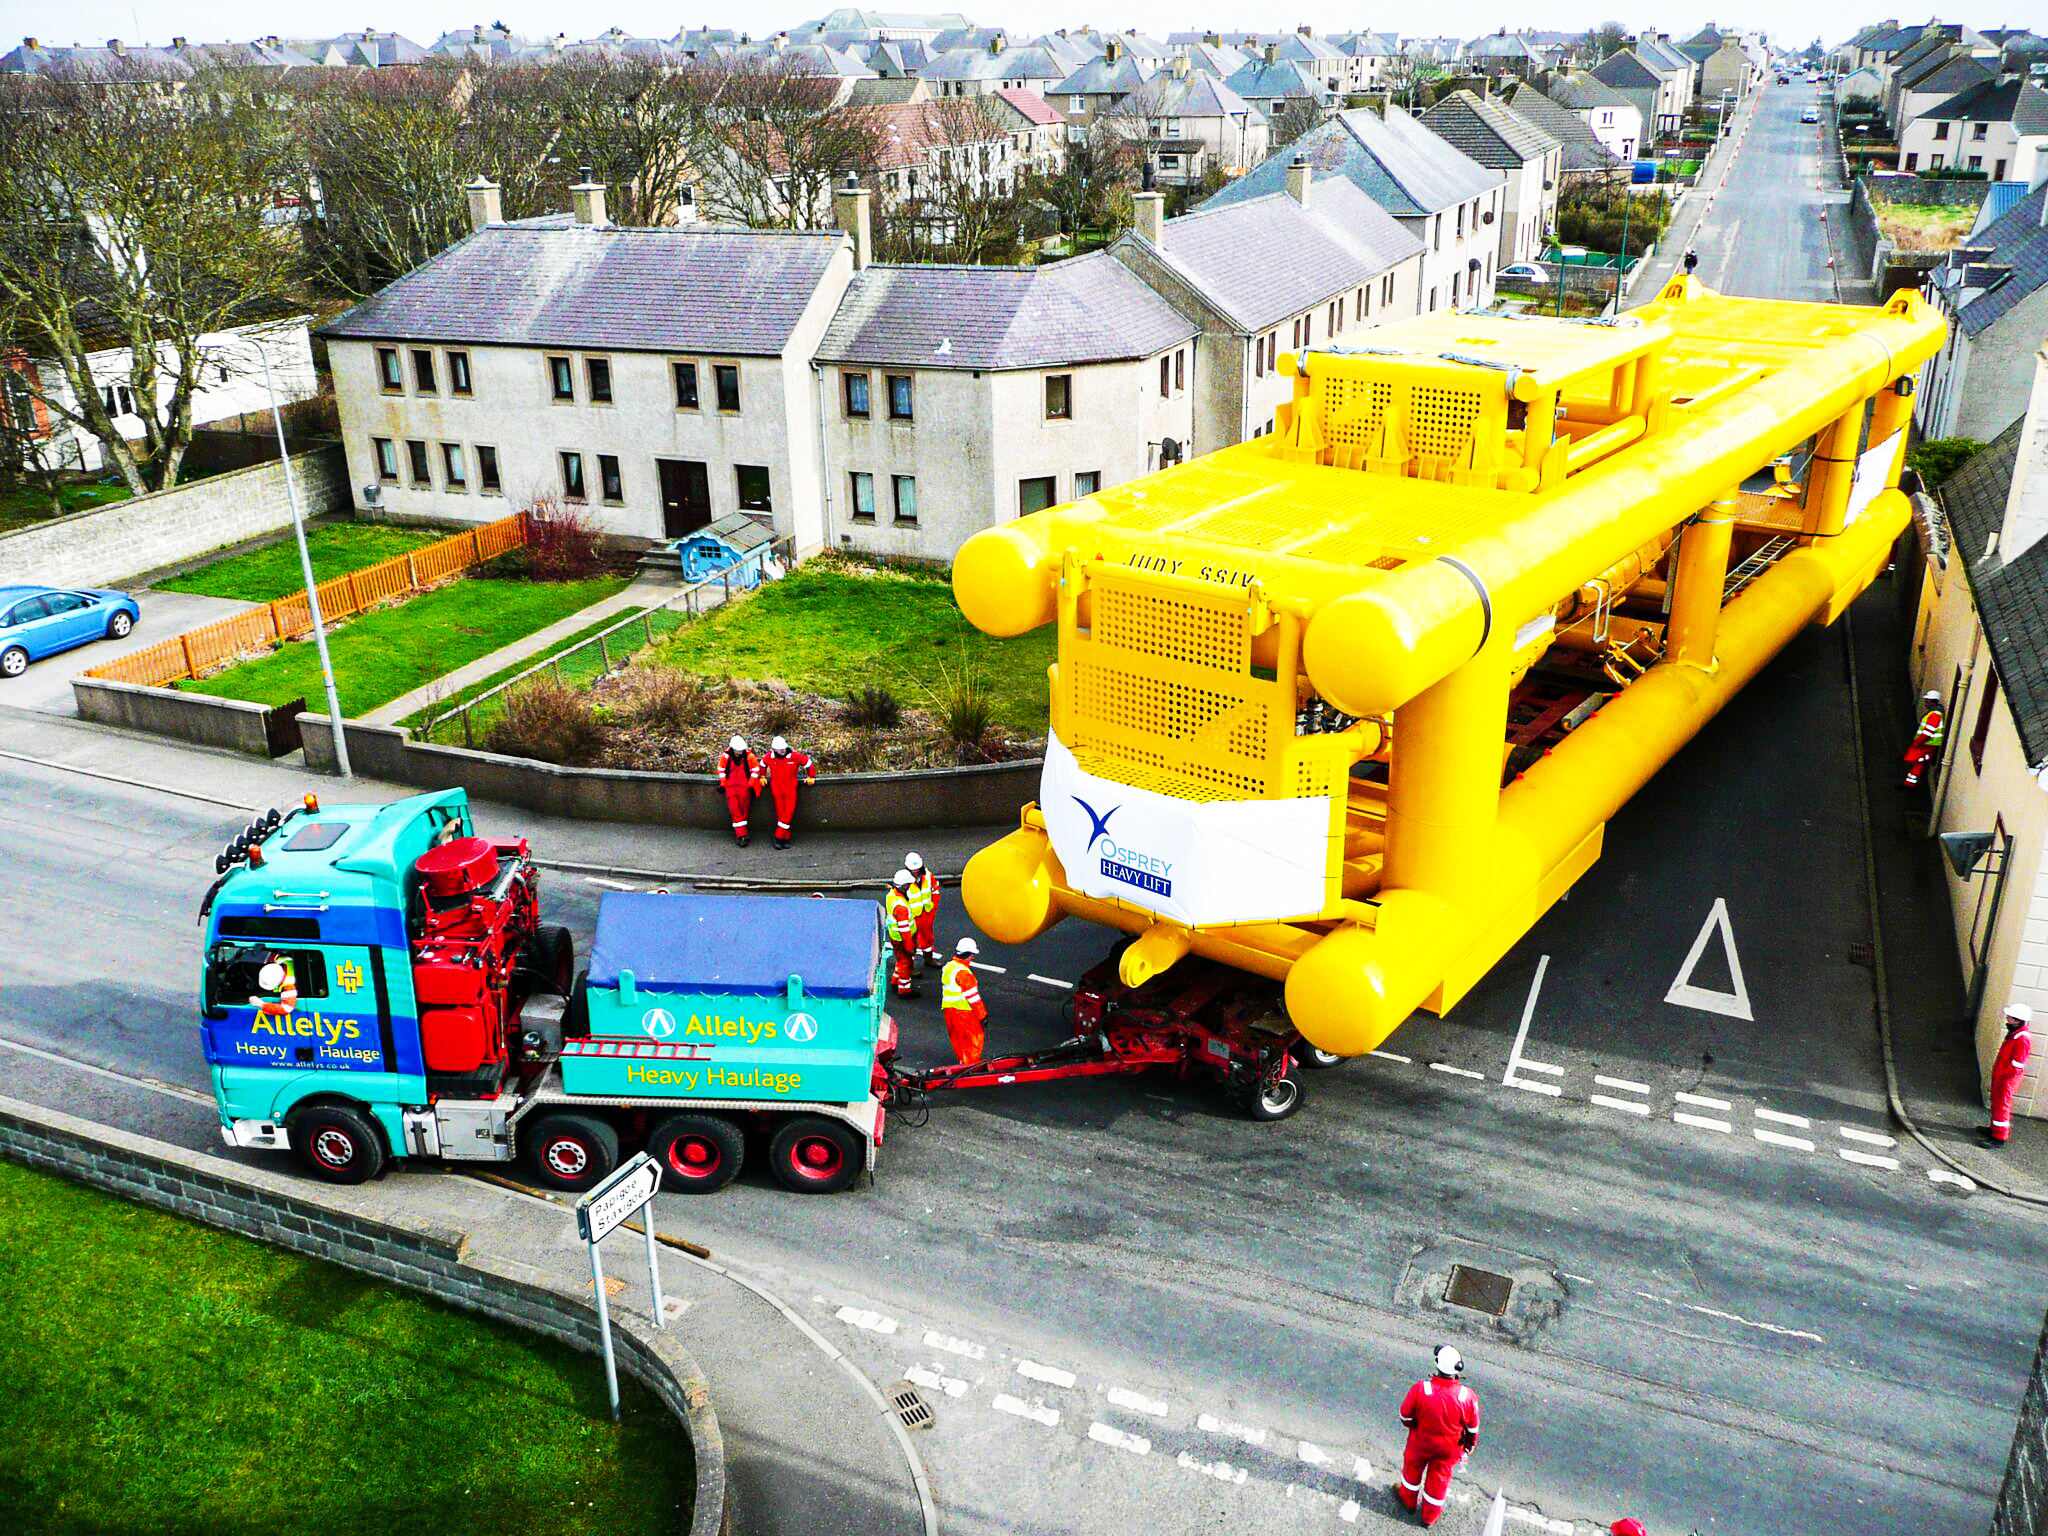 Towheads for subsea oil and gas being skilfully driven through a very small village, with Osprey engineers and project managers overseeing the move.